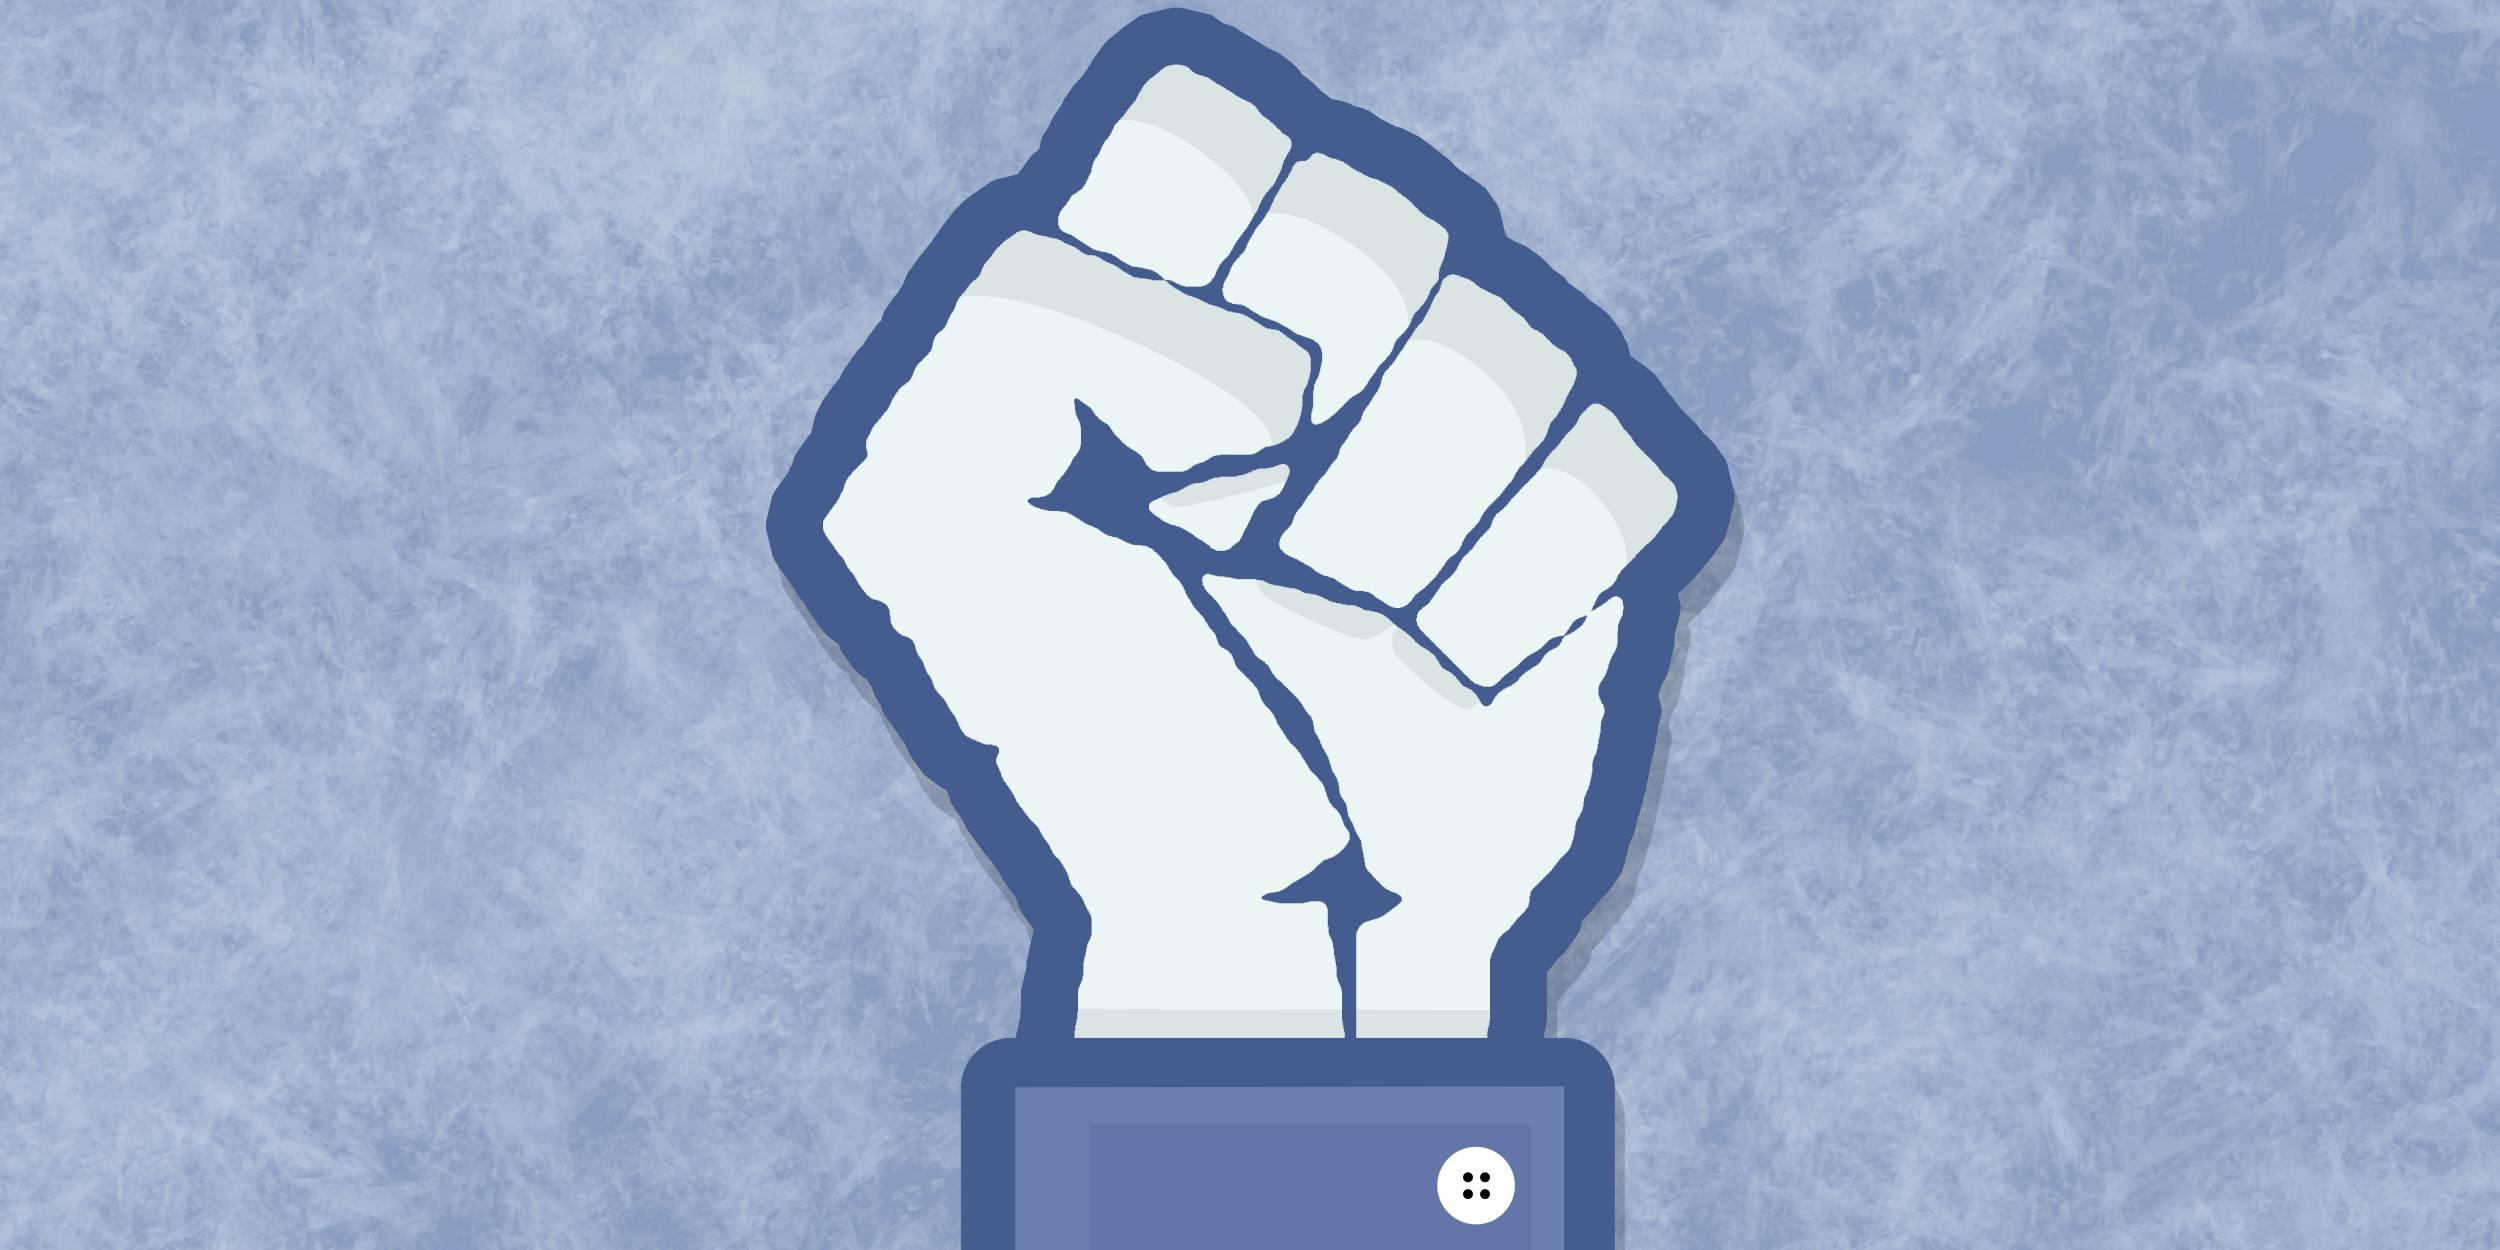 Facebook 'like' icon and black power fist mashup